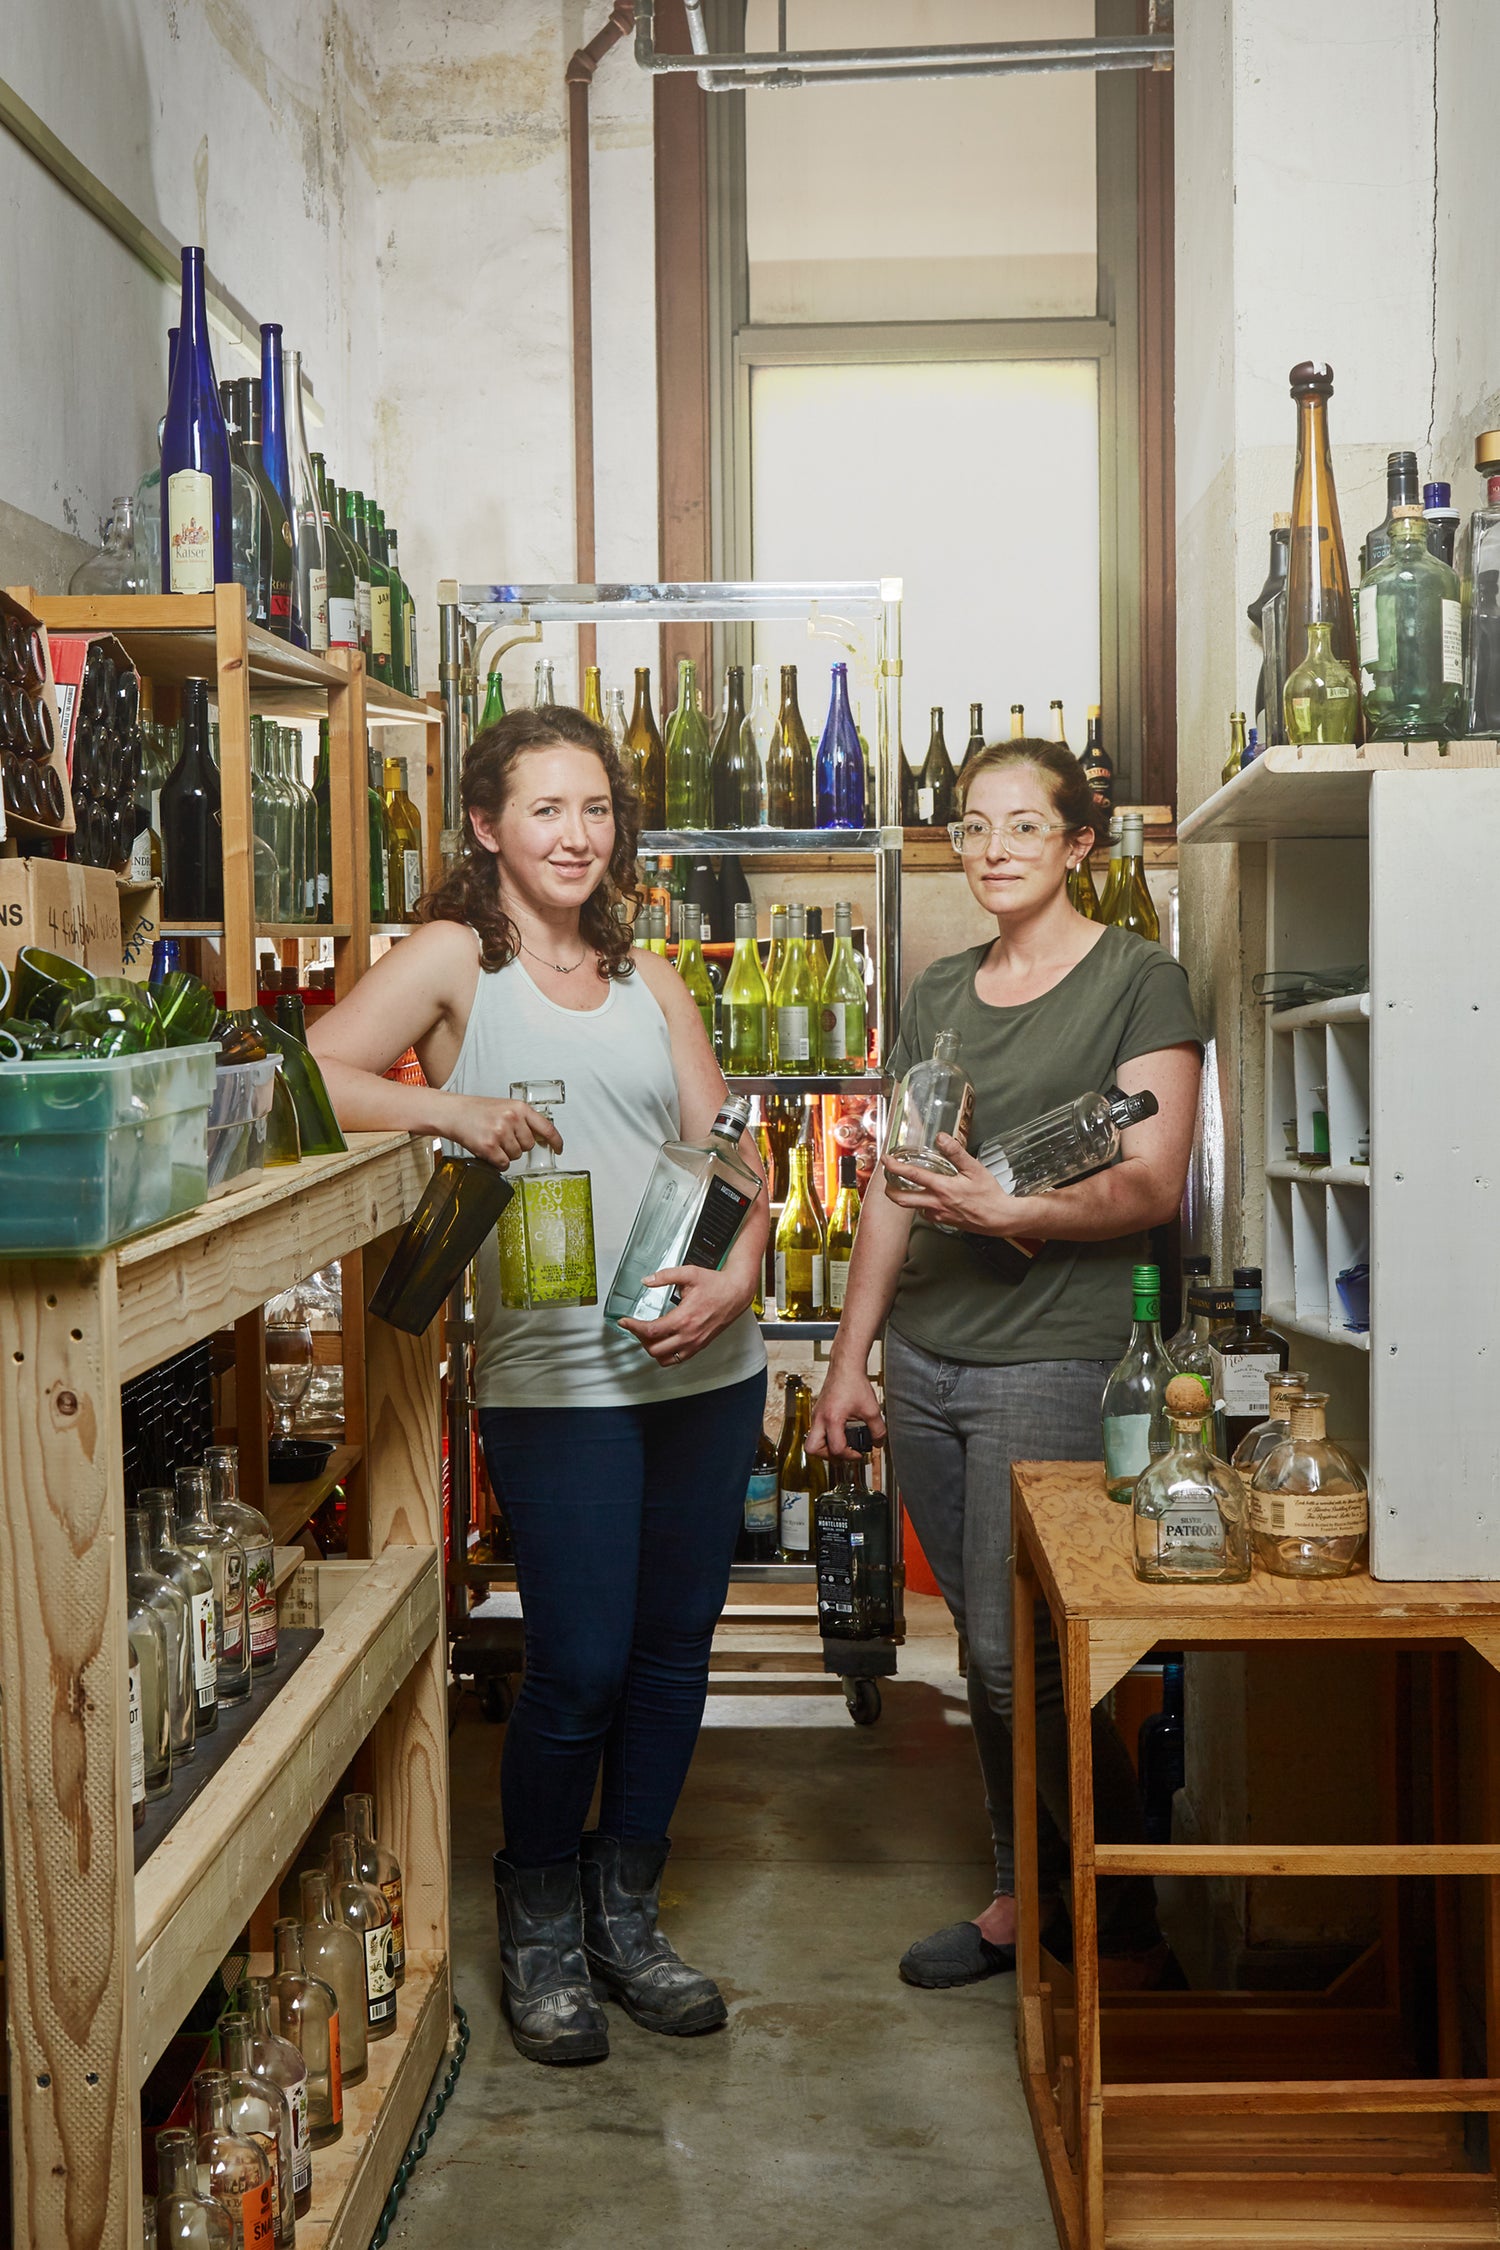 Two women wearing a grey shirt and dark grey shirt holding bottles in a room full of bottles